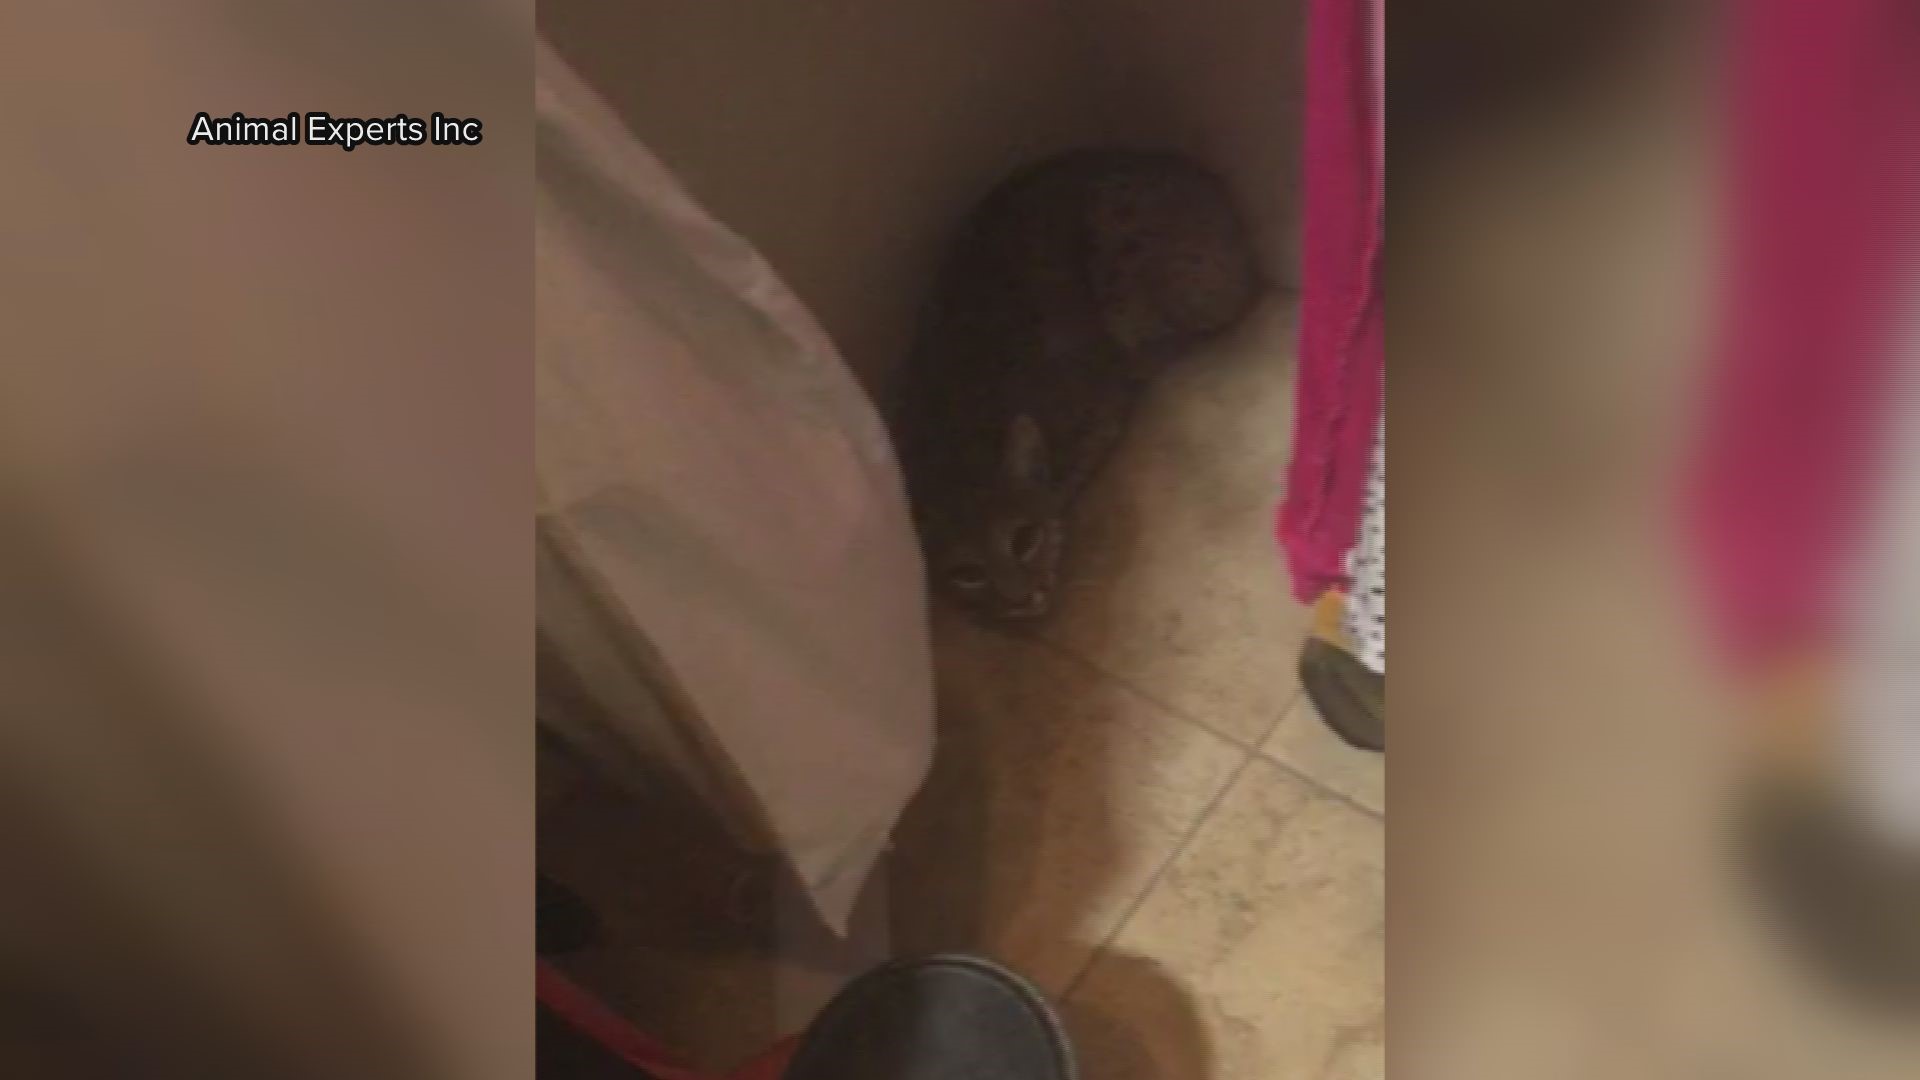 A bobcat entered a Tucson woman's home where it immediately sought refuge in her closet. Watch as Animal Experts Inc capture the wild cat.